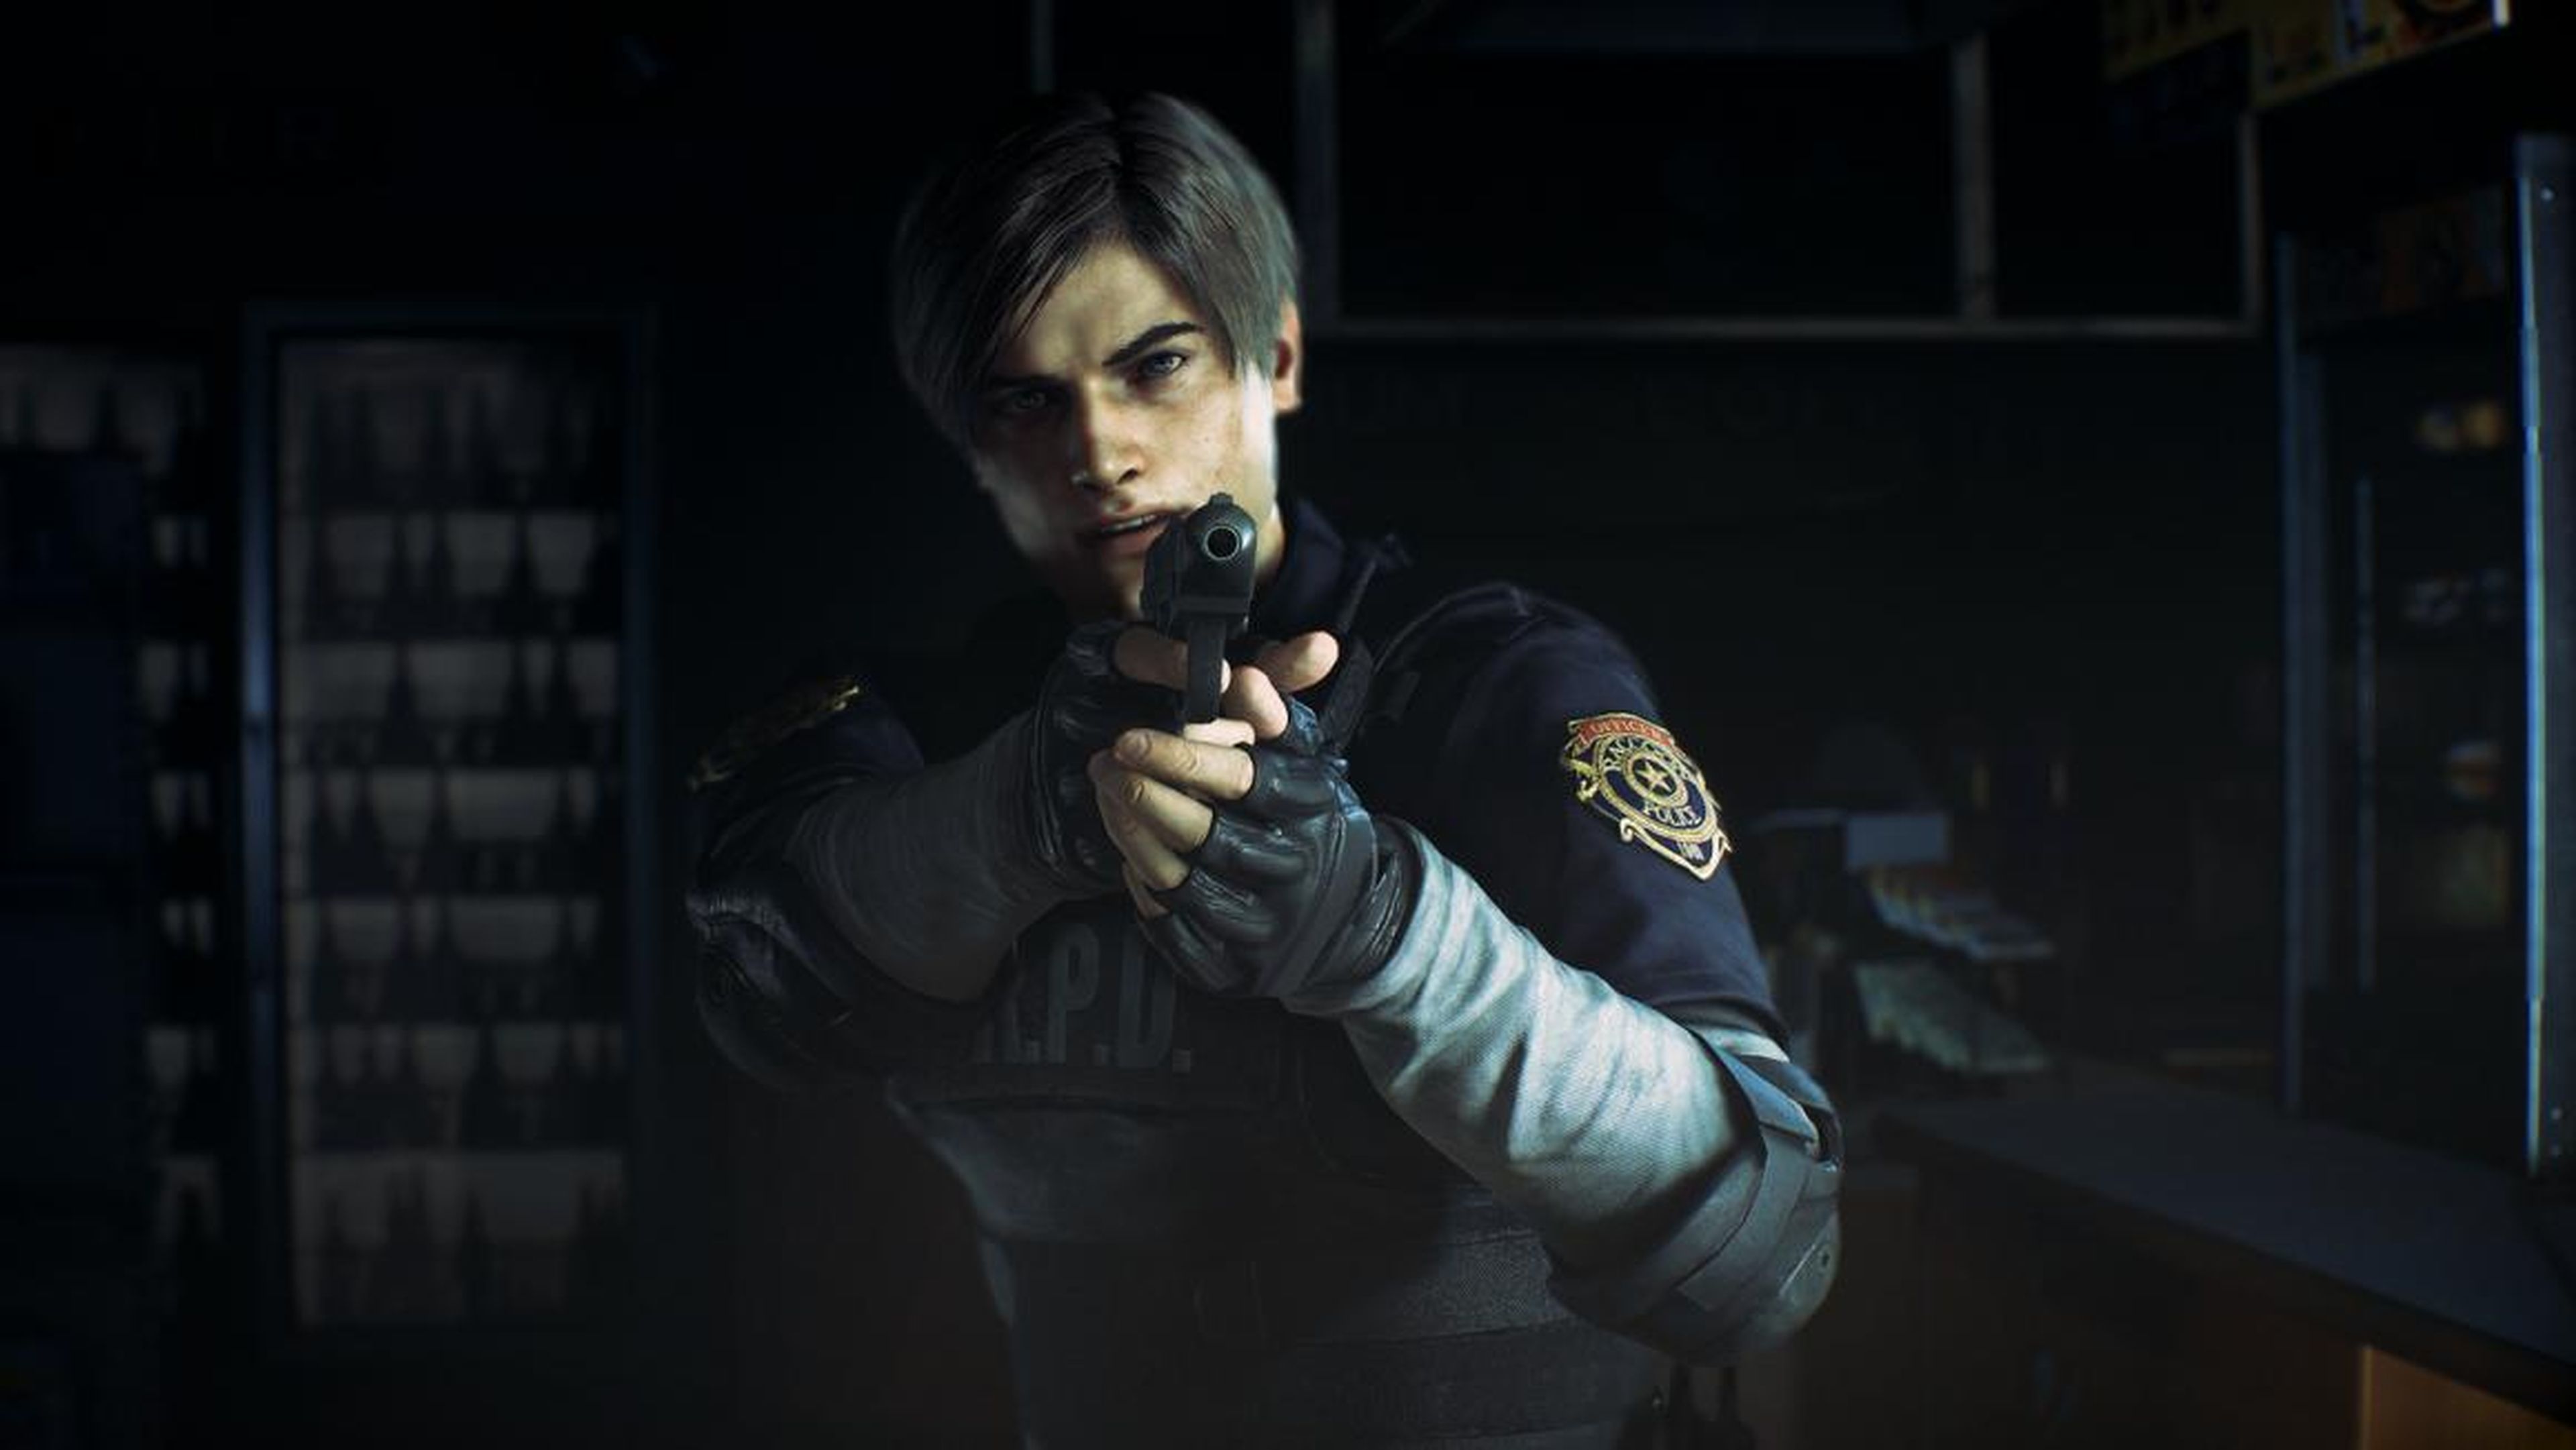 Leon's personality is a bit different in the remake, but he's still the rookie cop we know.